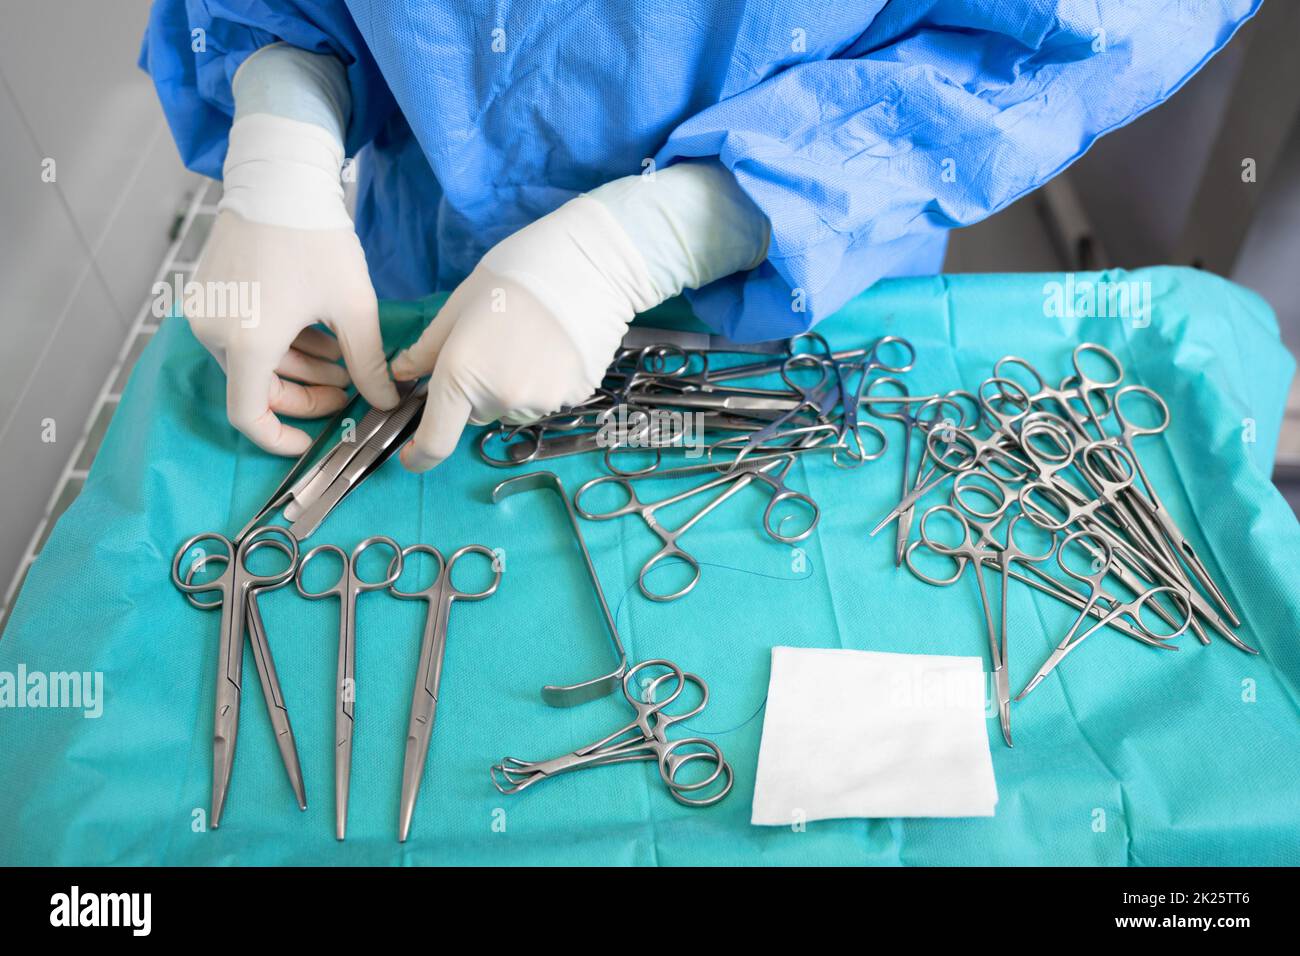 Multiple surgery instruments on blue table above view. surgeon take surgical tools from table. Stock Photo